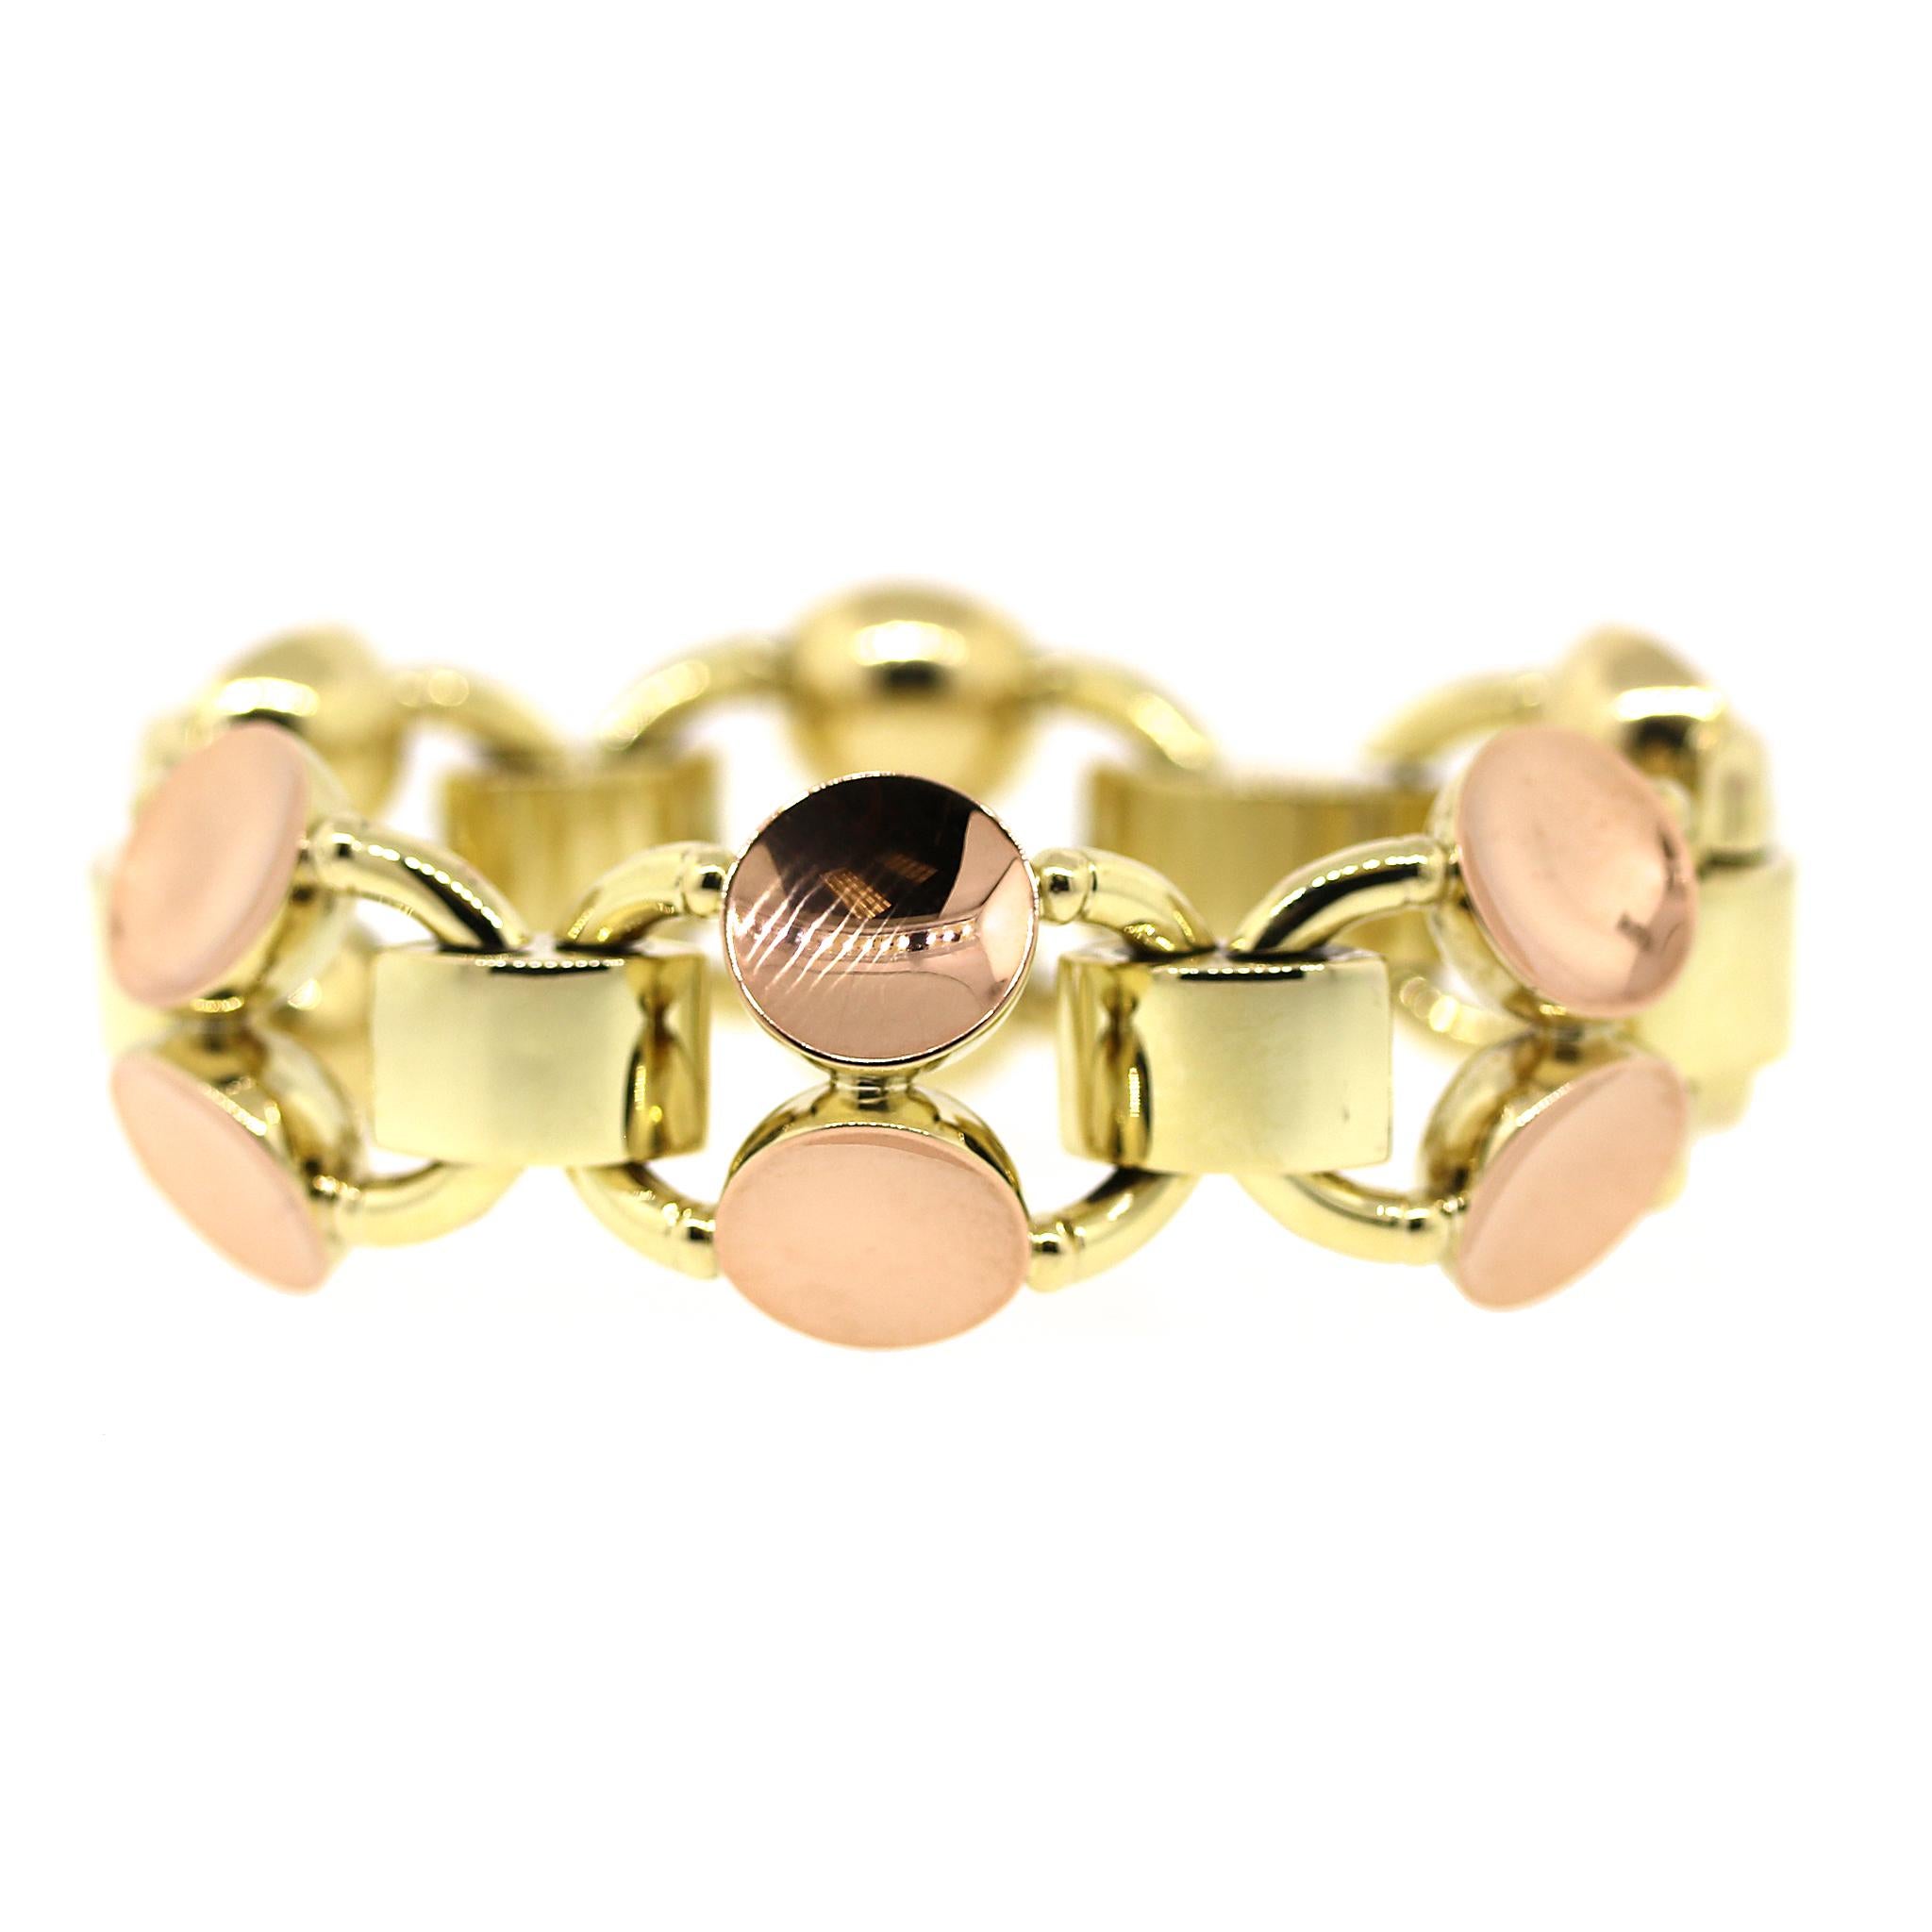 Retro Style 14kt Two-tone Gold Bracelet In Excellent Condition For Sale In New York, NY